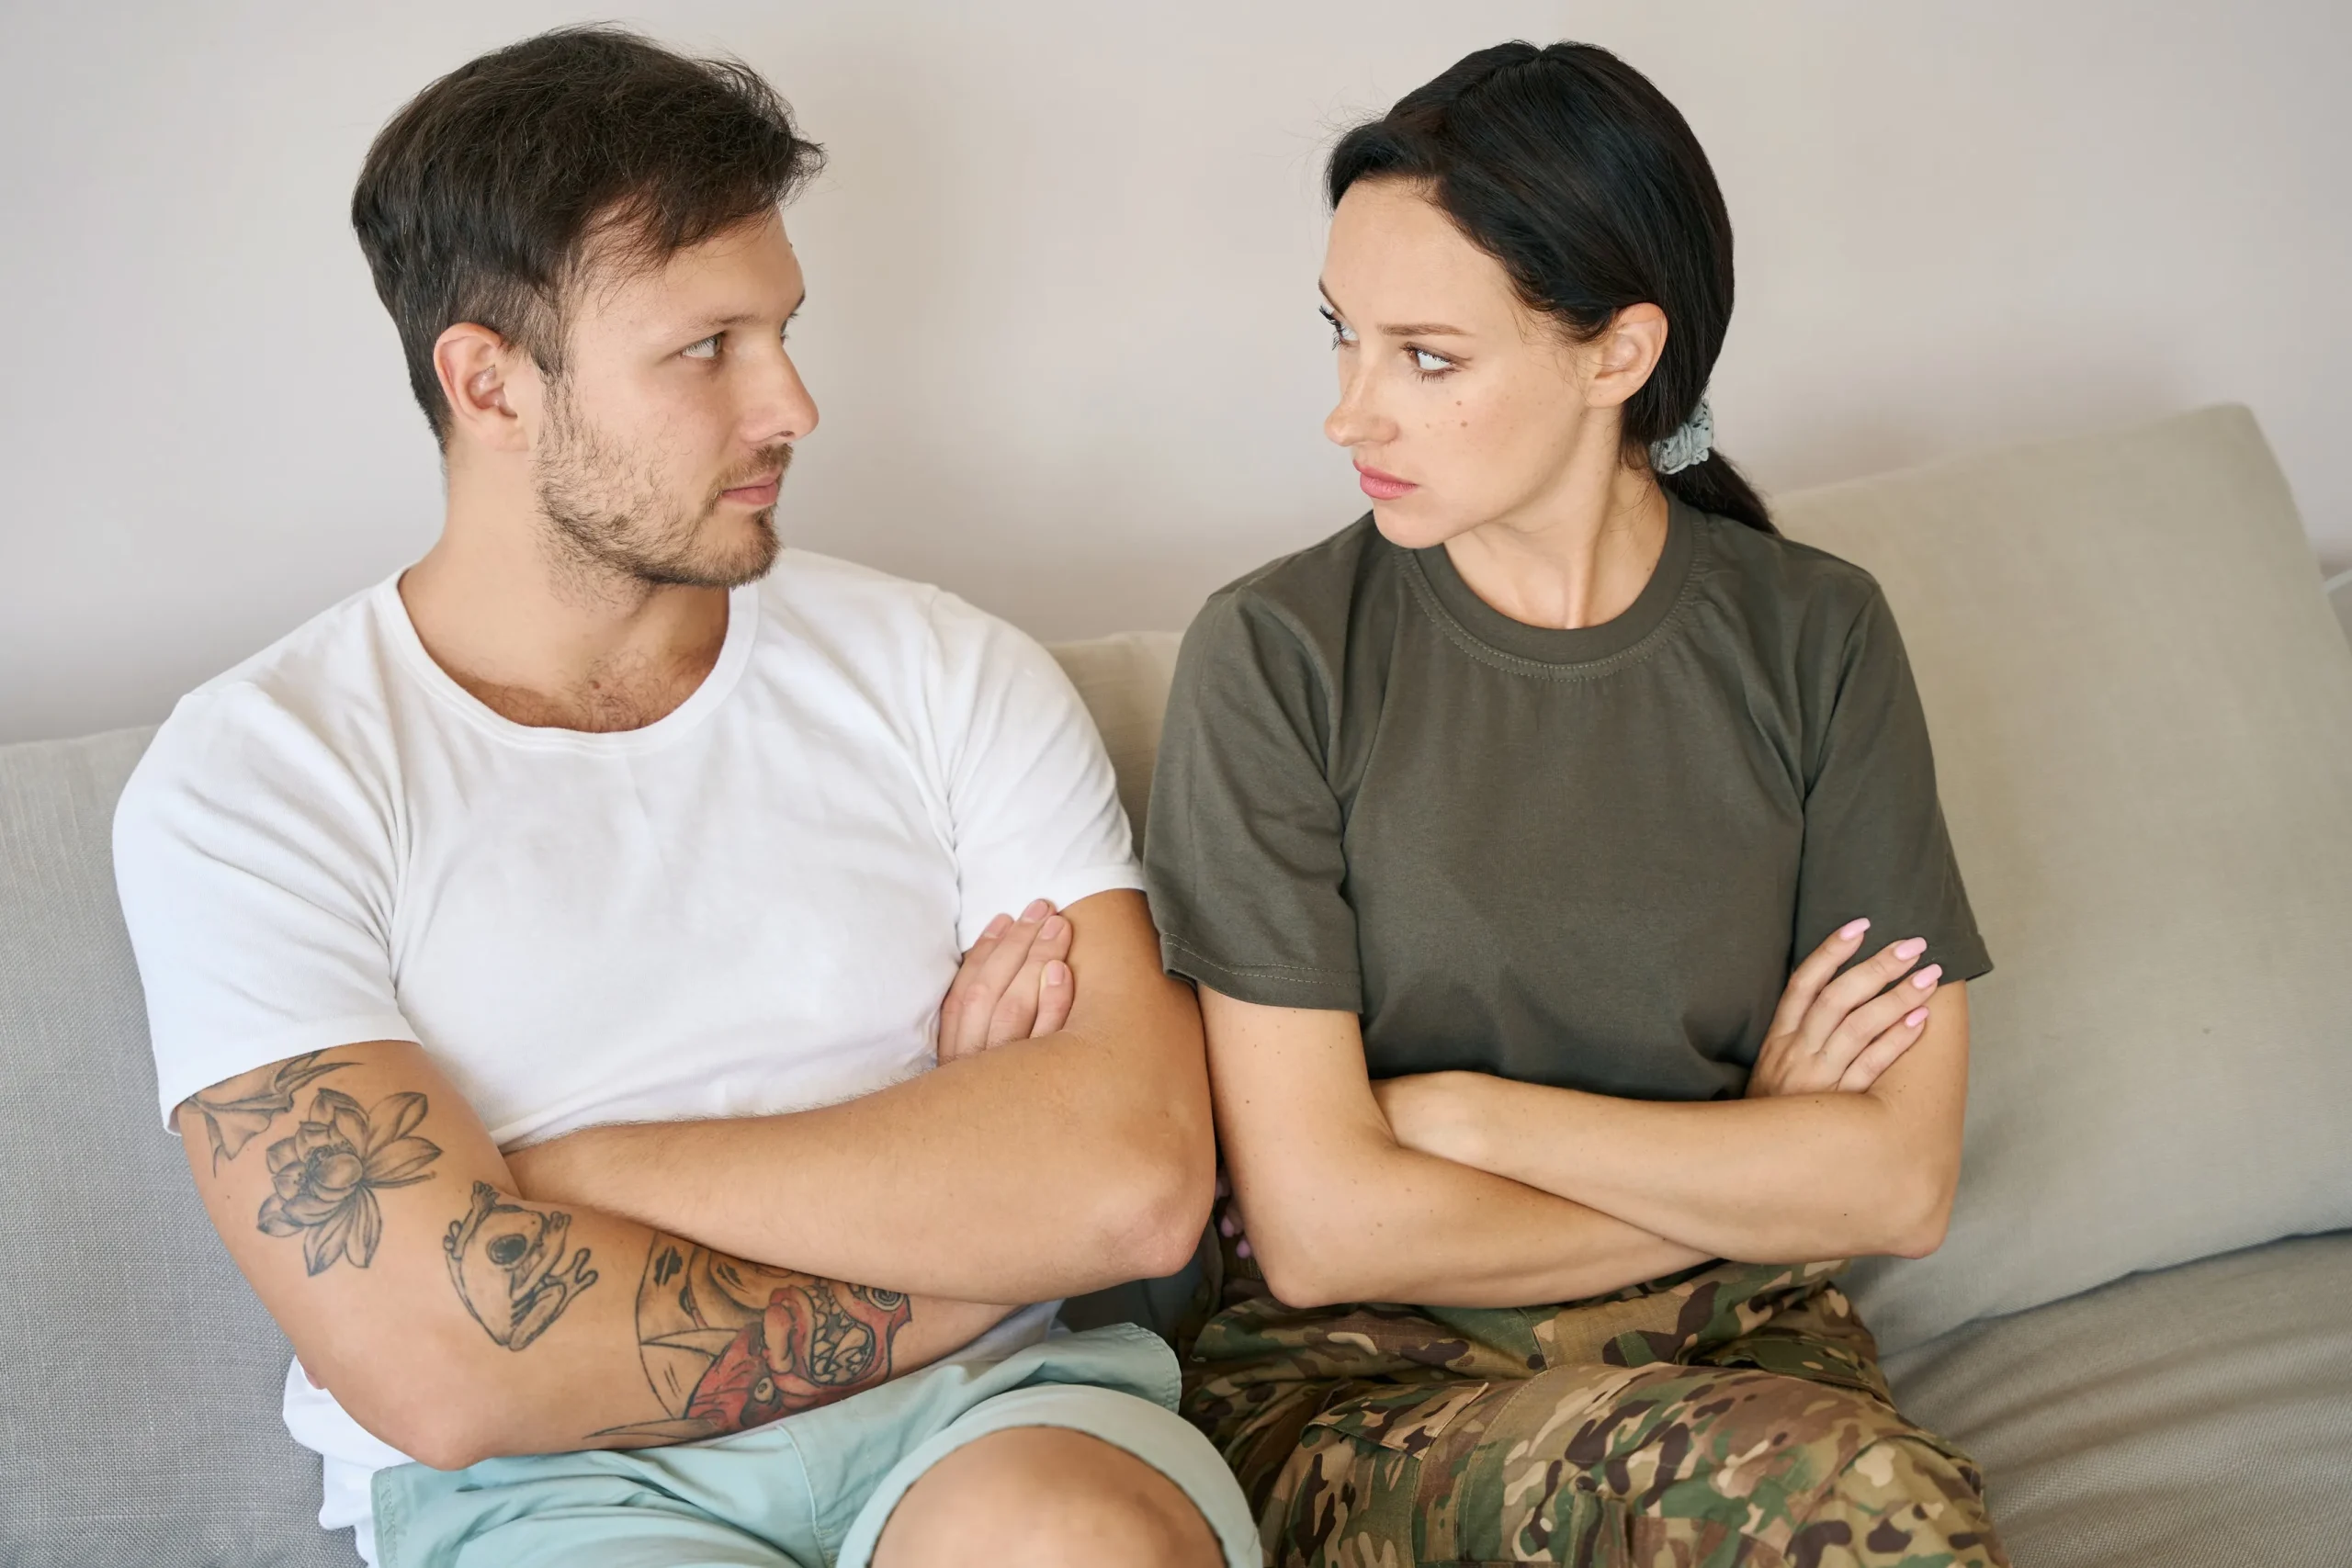 A military woman and husband arguing before divorce.